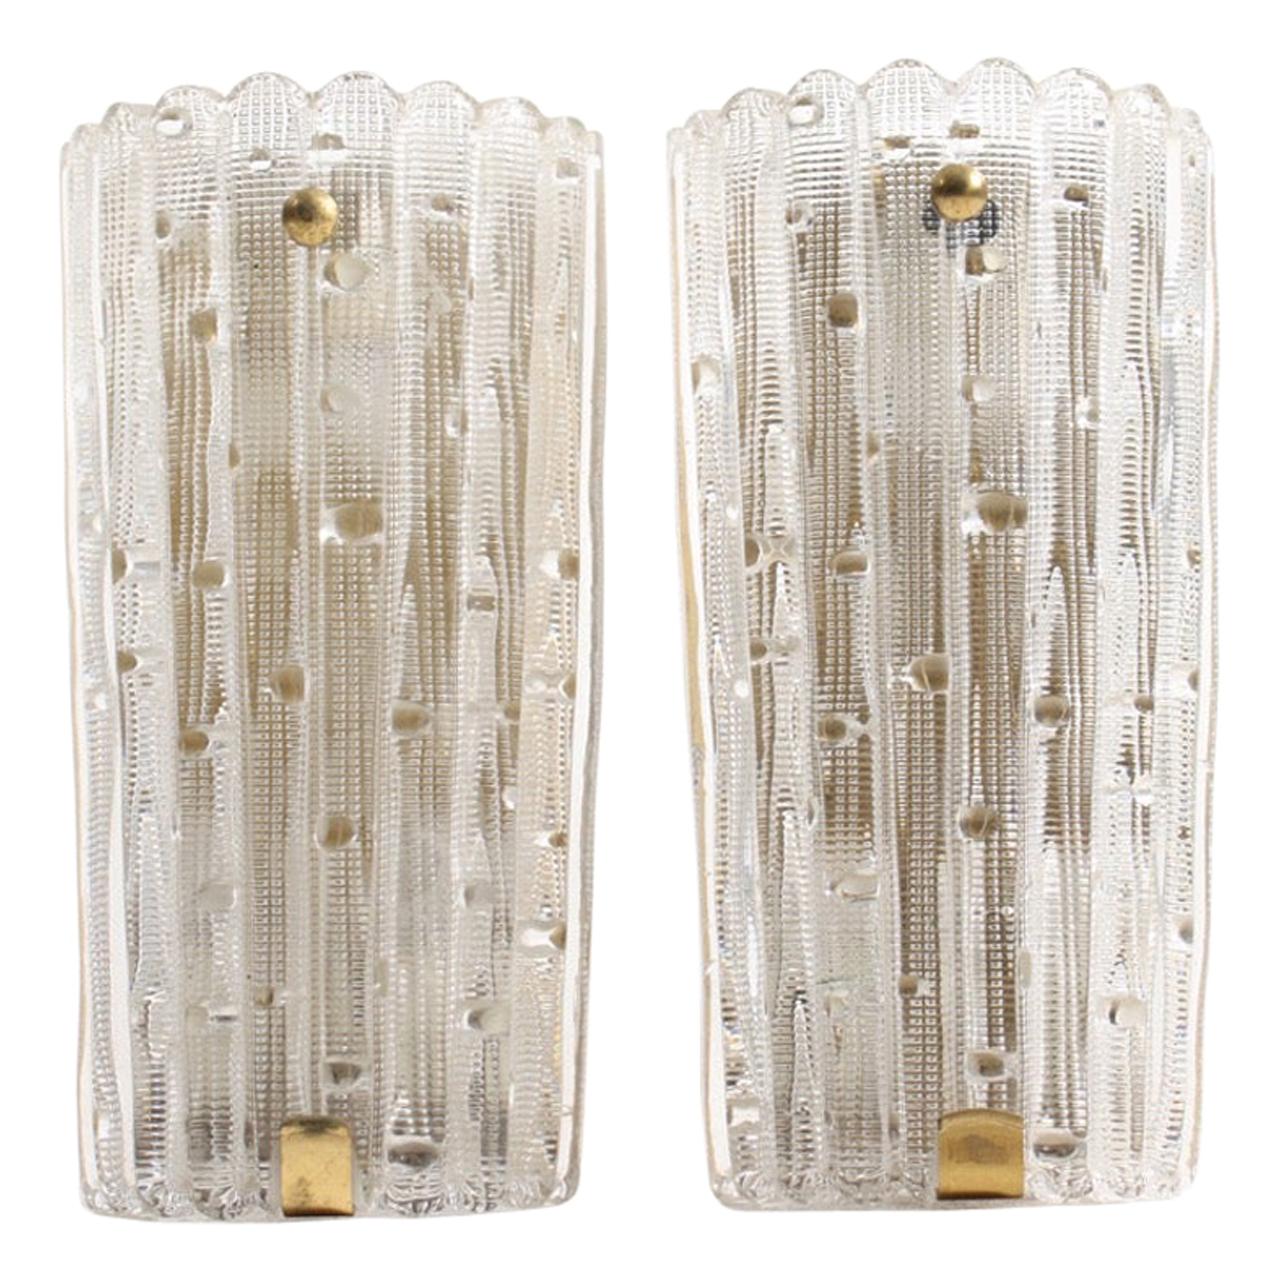 Pair of Midcentury Wall Sconces Designed by Carl Fagerlund for Orrefors Glass